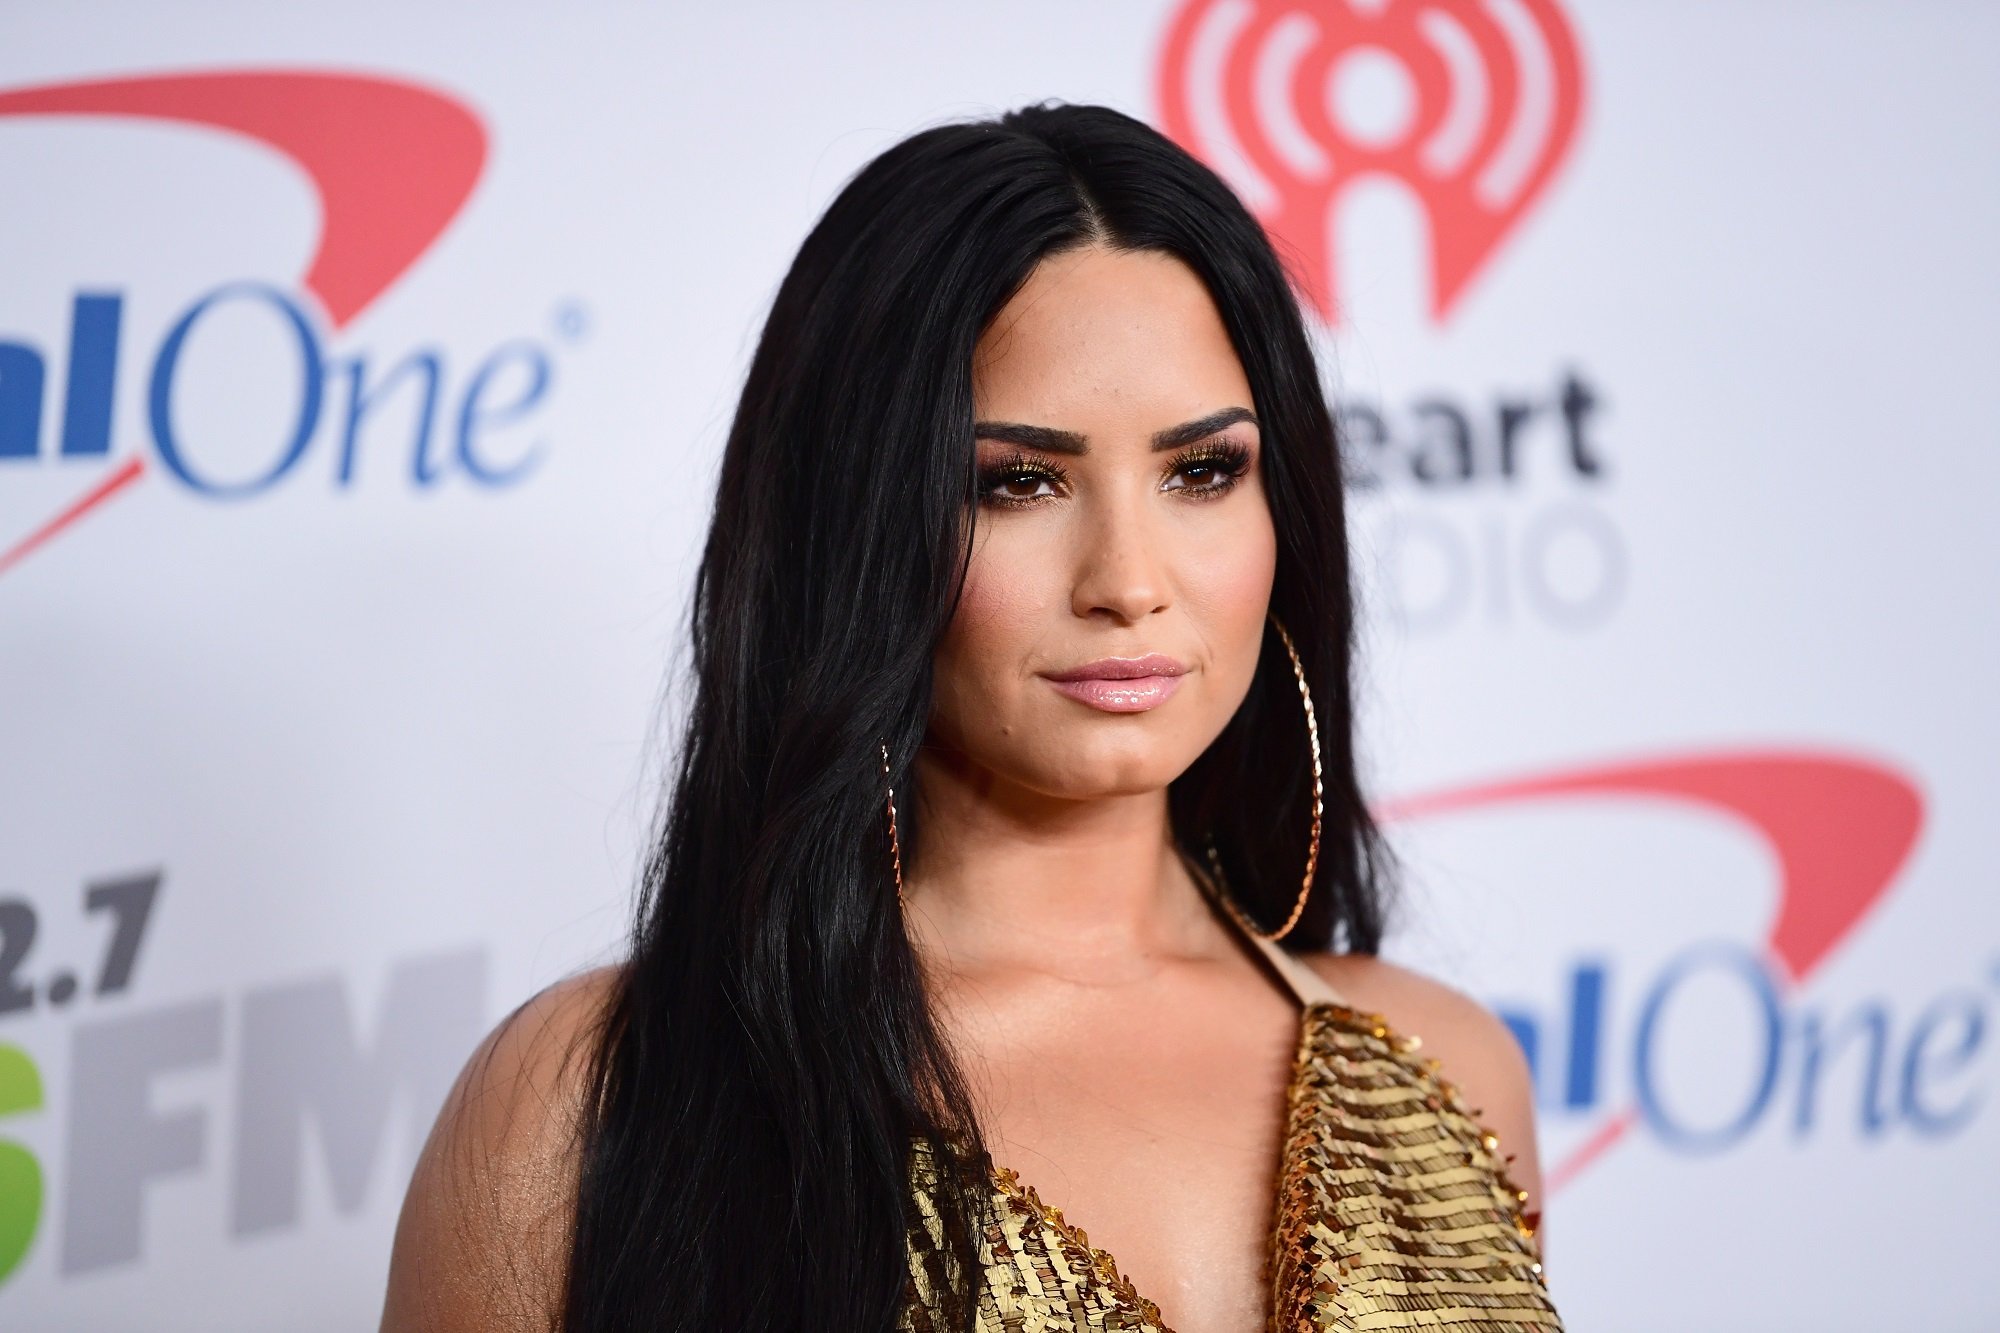 Demi Lovato poses in the press room during 102.7 KIIS FM's Jingle Ball 2017 presented by Capital One at The Forum on December 1, 2017 in Inglewood, California.